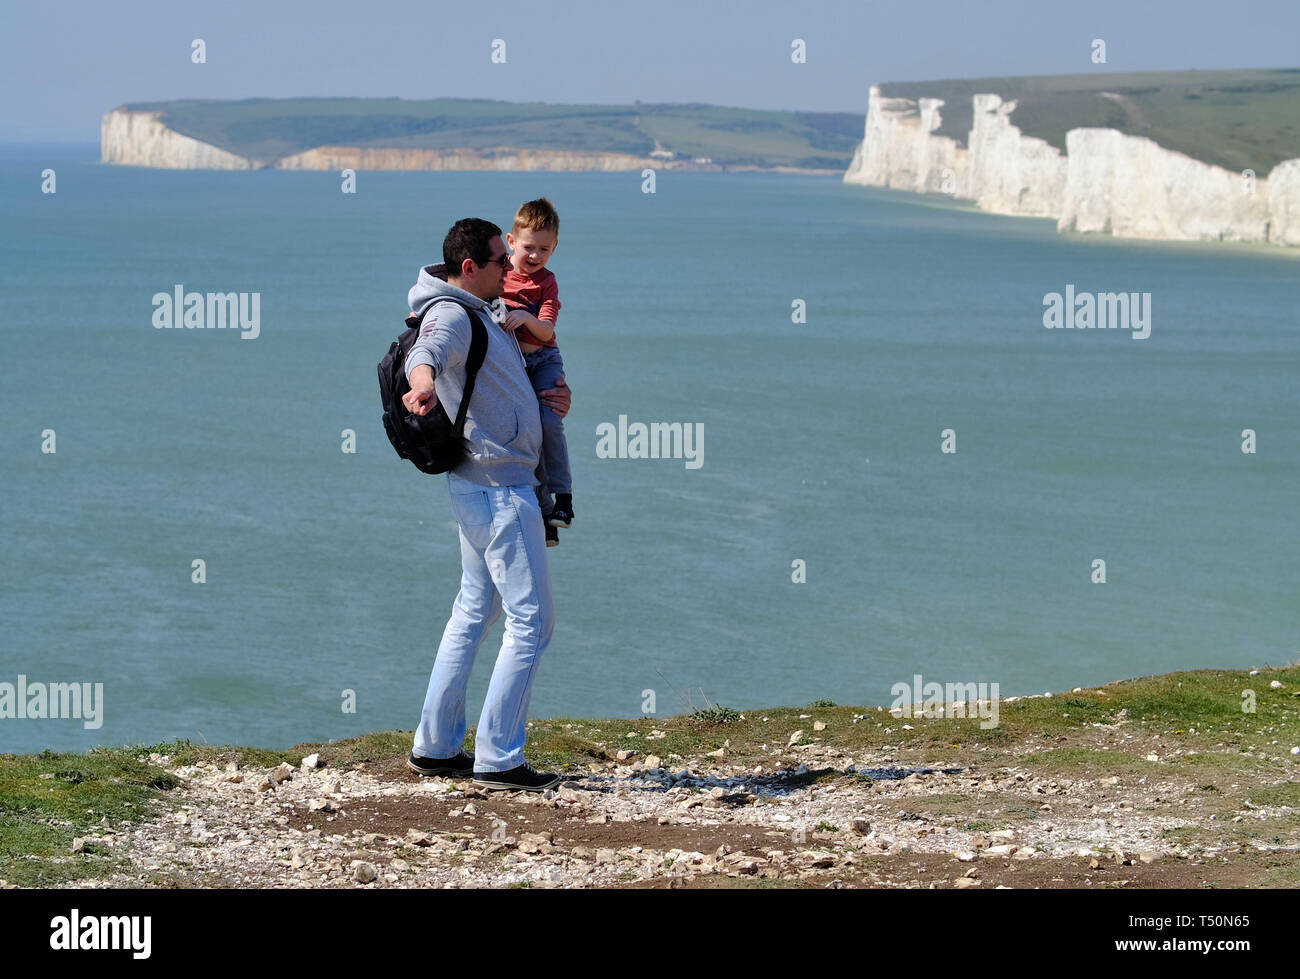 Birling Gap, East Sussex, UK. 20th April 2019. The unseasonably warm weather has seen thousands of tourists flock to the iconic Seven Sisters chalk cliffs near Eastbourne, East Sussex, many of whom take dangerous selfieis on the unstable cliff edge. One man was seen dangling a small child in his arms as he peered over the sheer drop. The cliffs are up to 400 foot high and are a well known suicide spot. © Peter Cripps/Alamy Live News Stock Photo